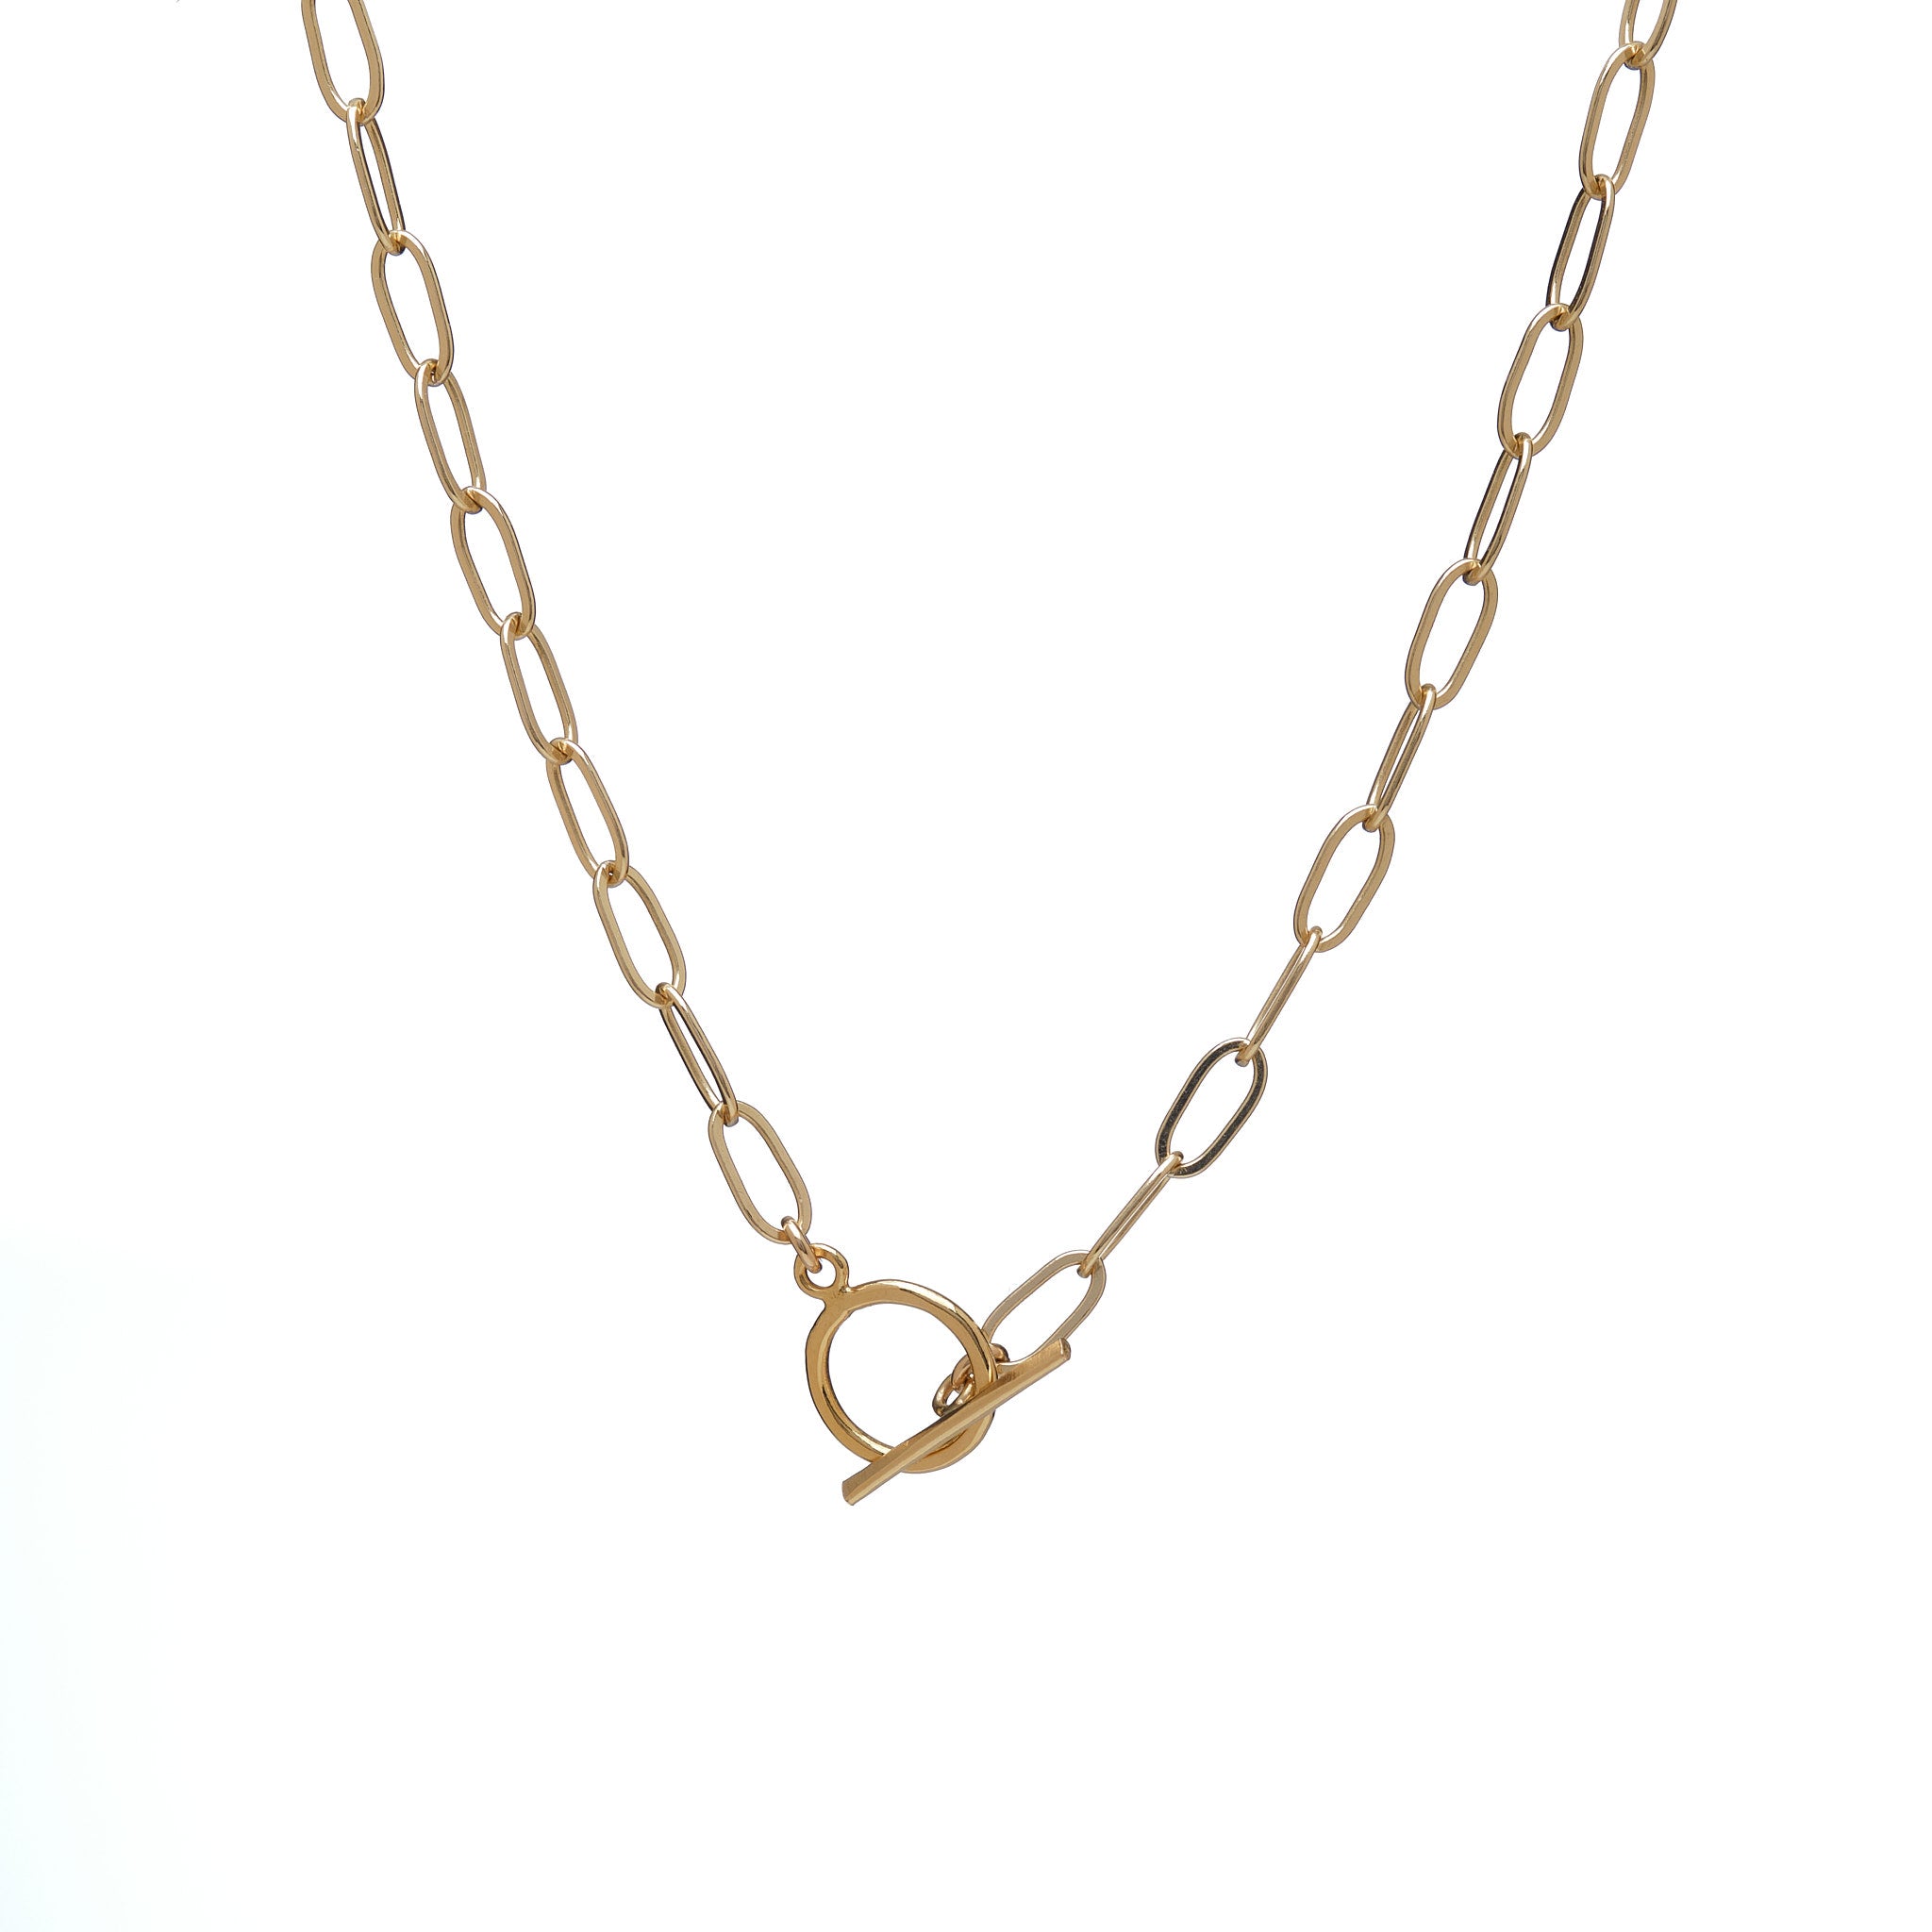 14K GOLD FILLED LAYERING CHAIN NECKLACE W/ TOGGLE CLASP – Kenda Kist